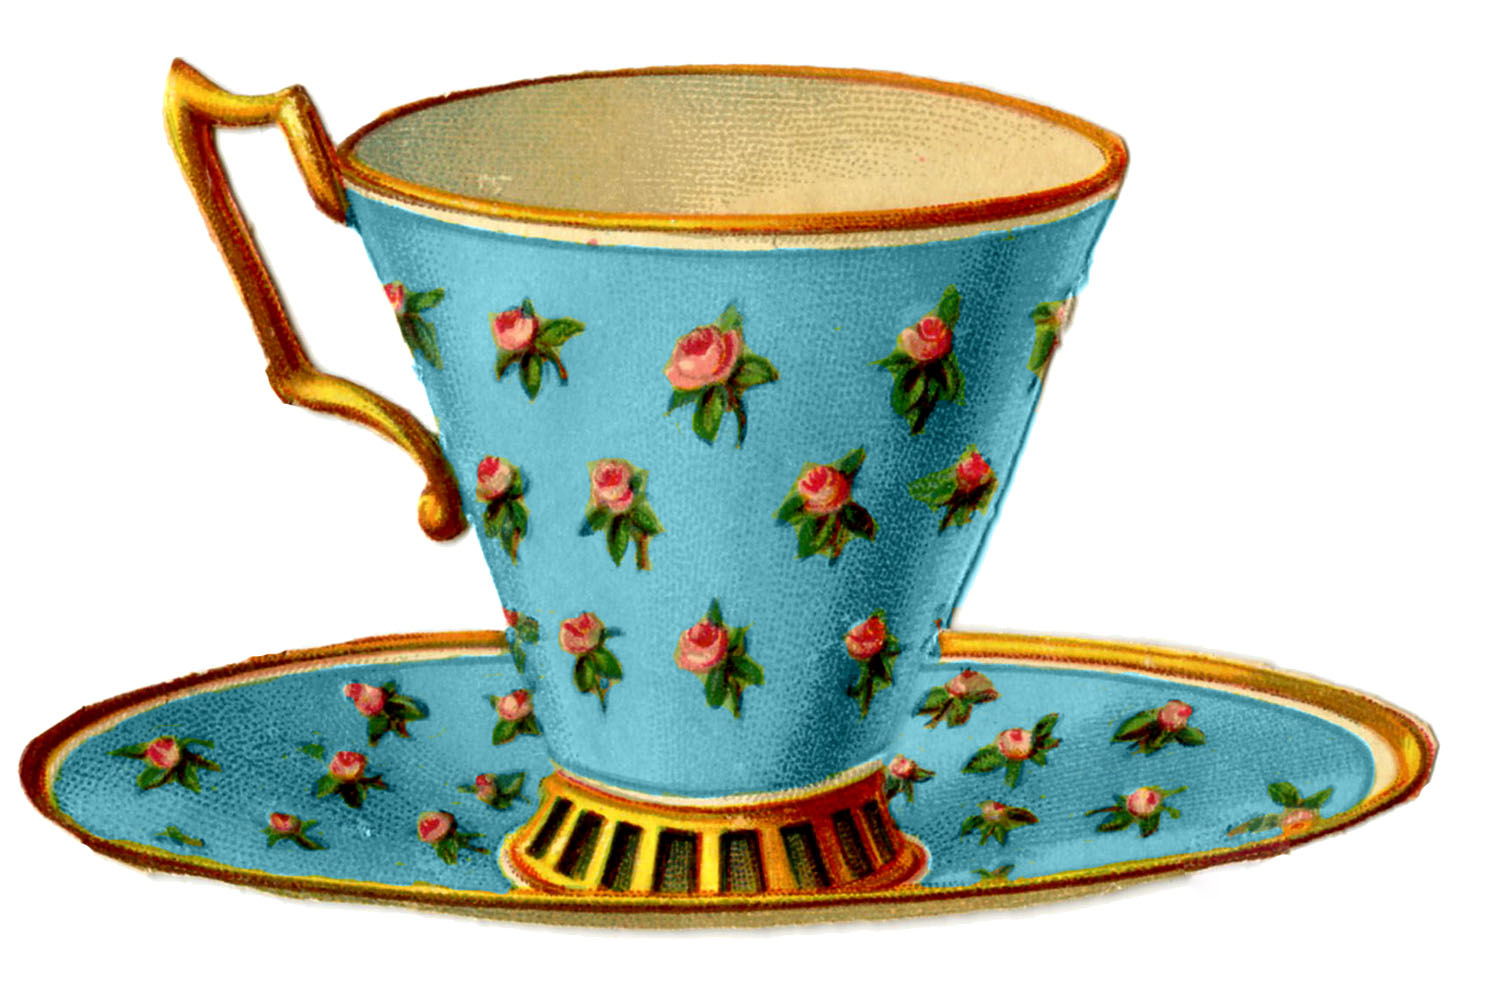 Vintage Graphics   3 Pretty Teacups With Roses   The Graphics Fairy